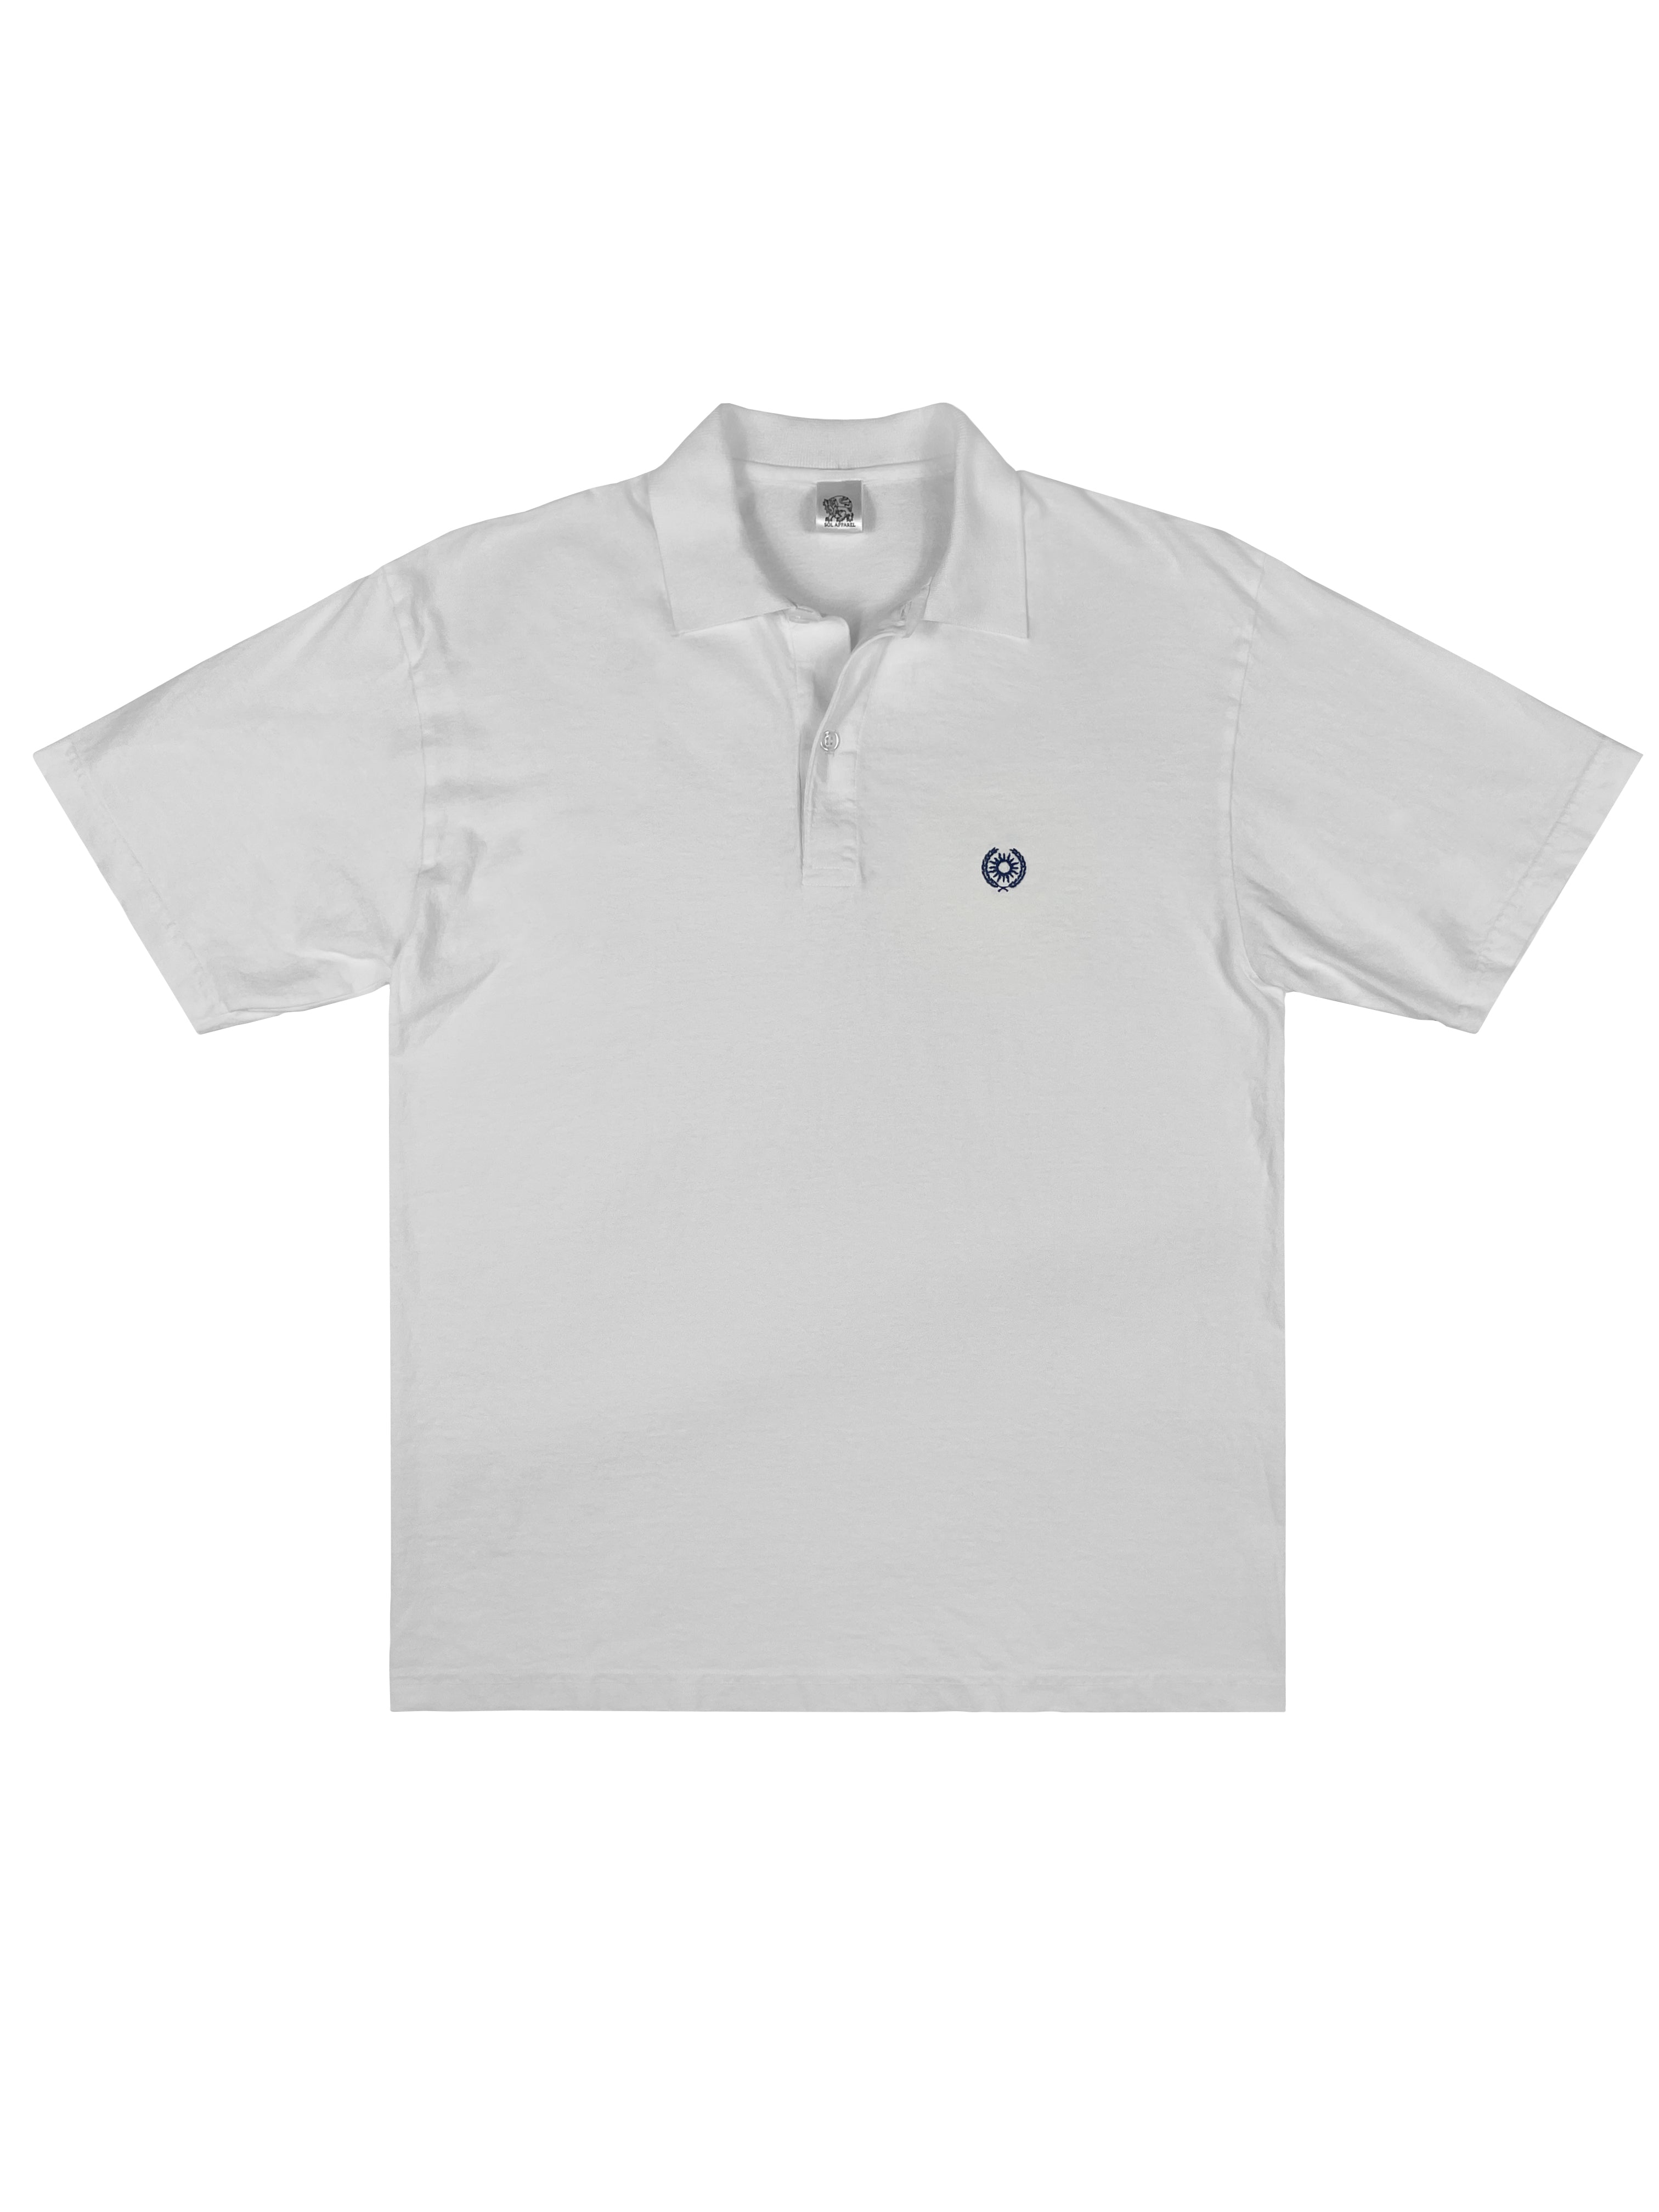 white polo tshirt in cotton with black embroidered sun